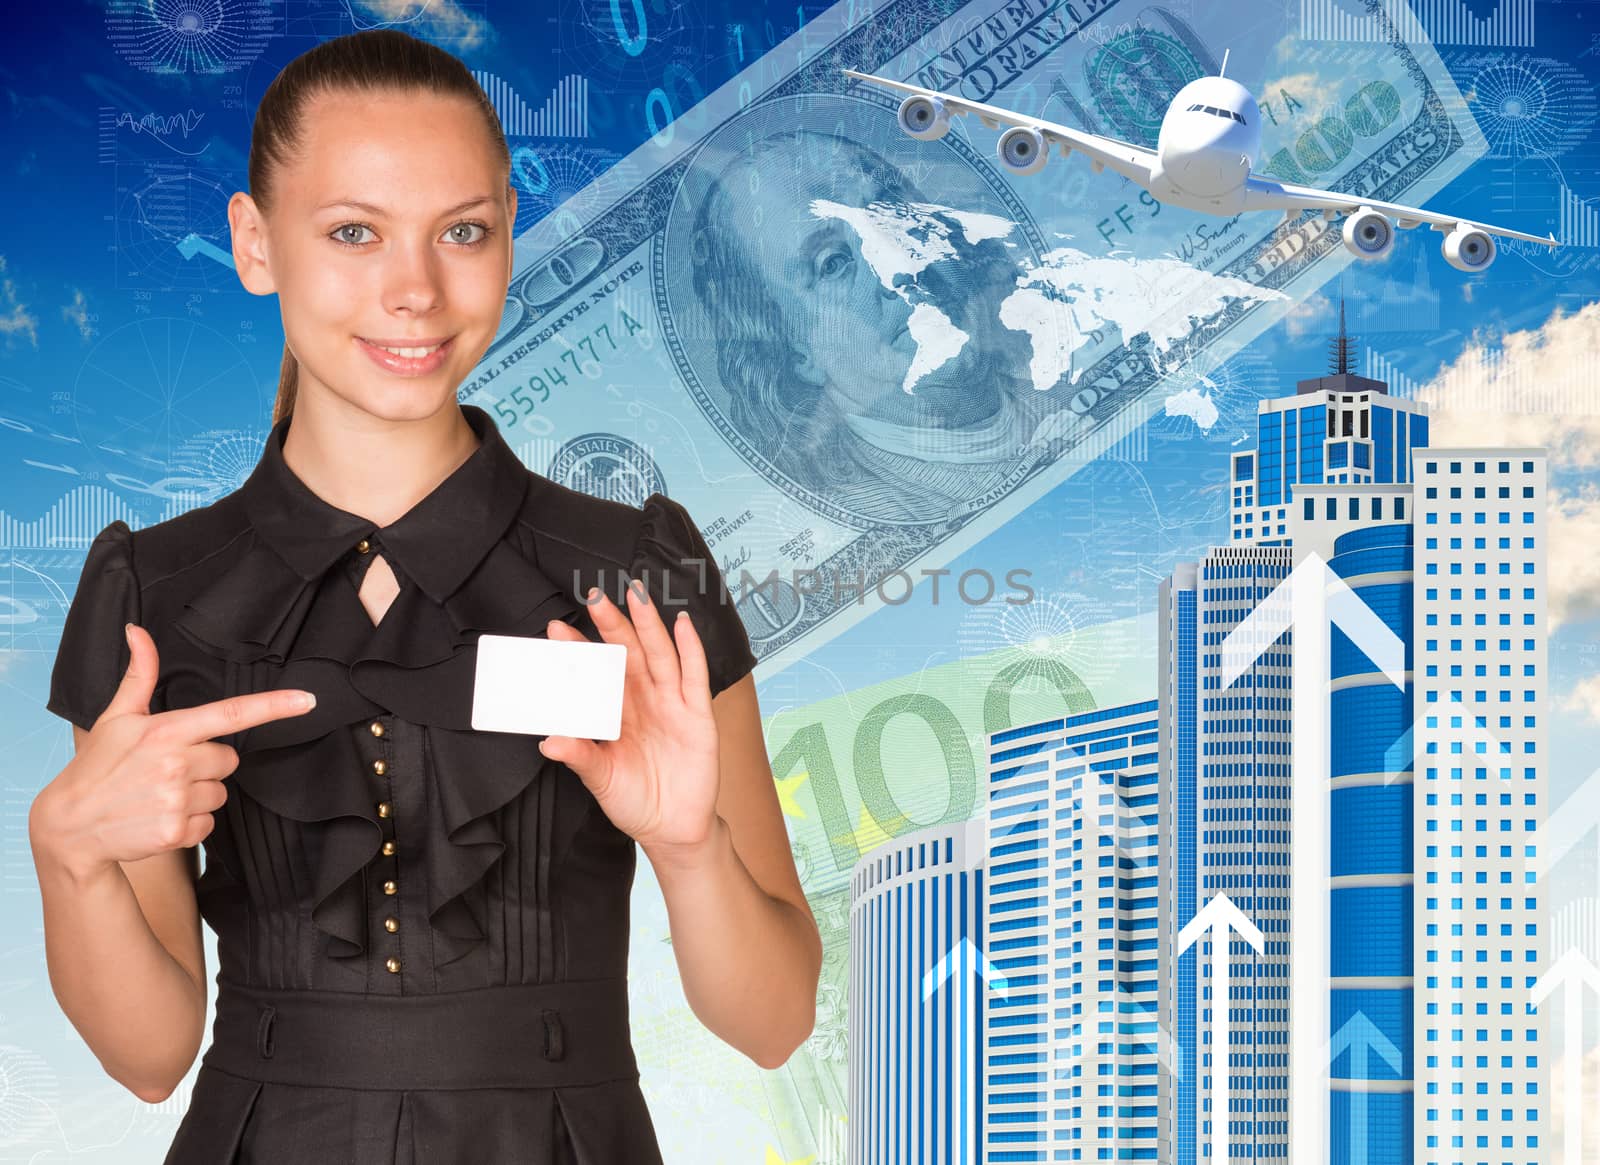 Beautiful businesswoman in dress holding empty white card and pointing finger at her. Buildings, money, airplane and world map as backdrop